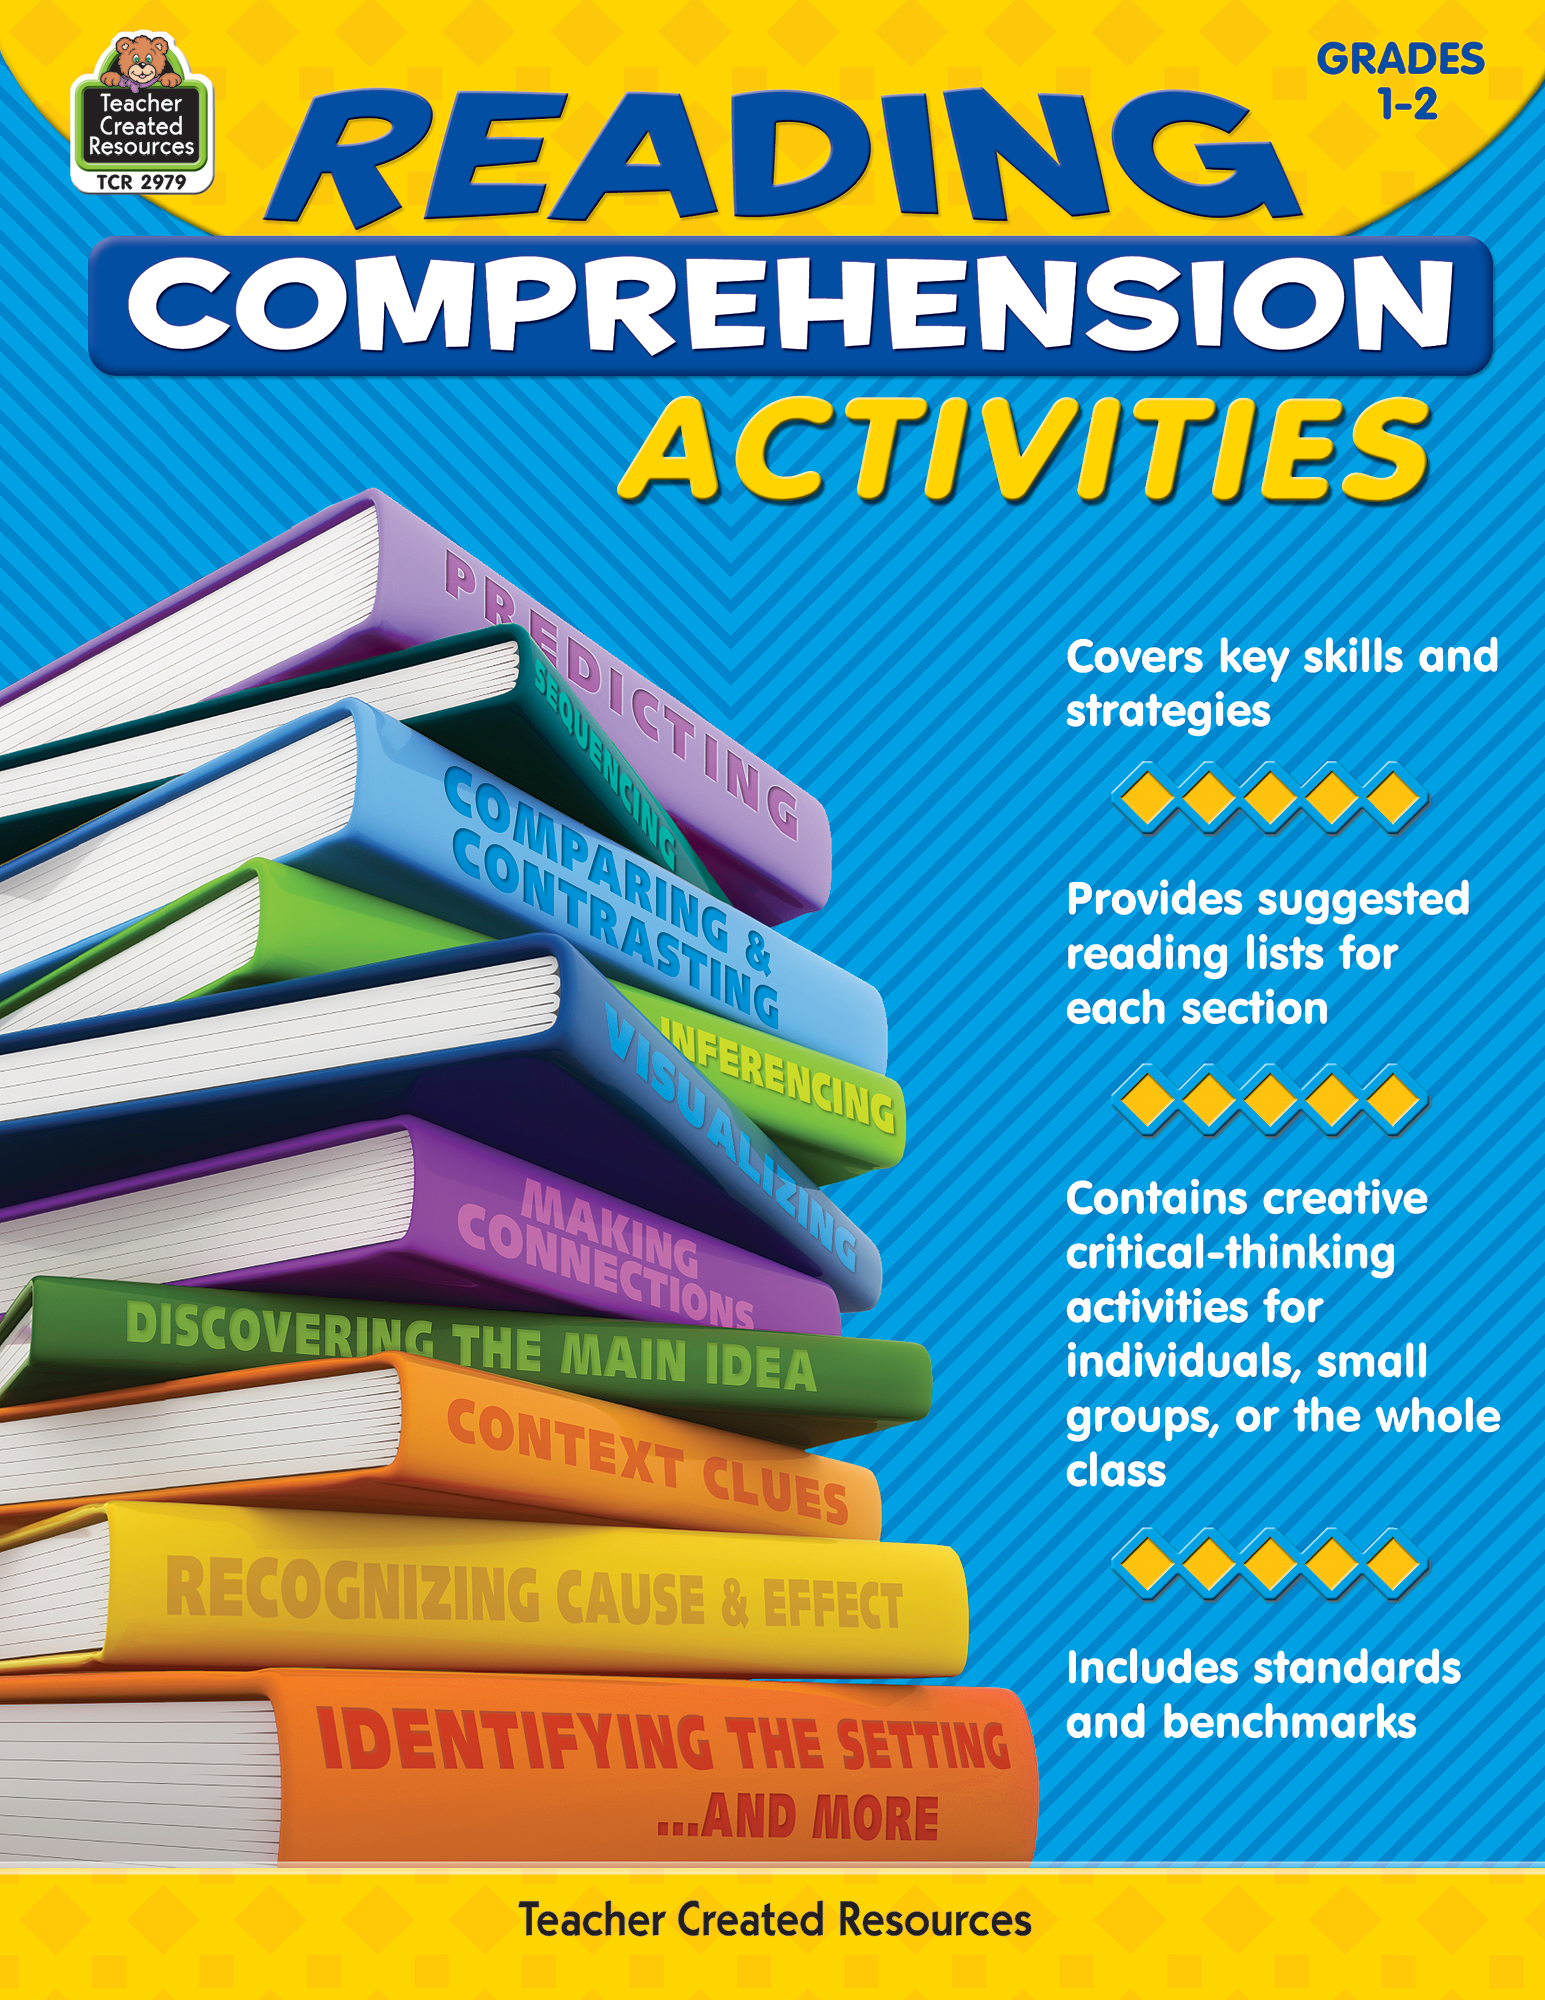 Reading Comprehension Activities Grade 1-2 - TCR2979 | Teacher Created